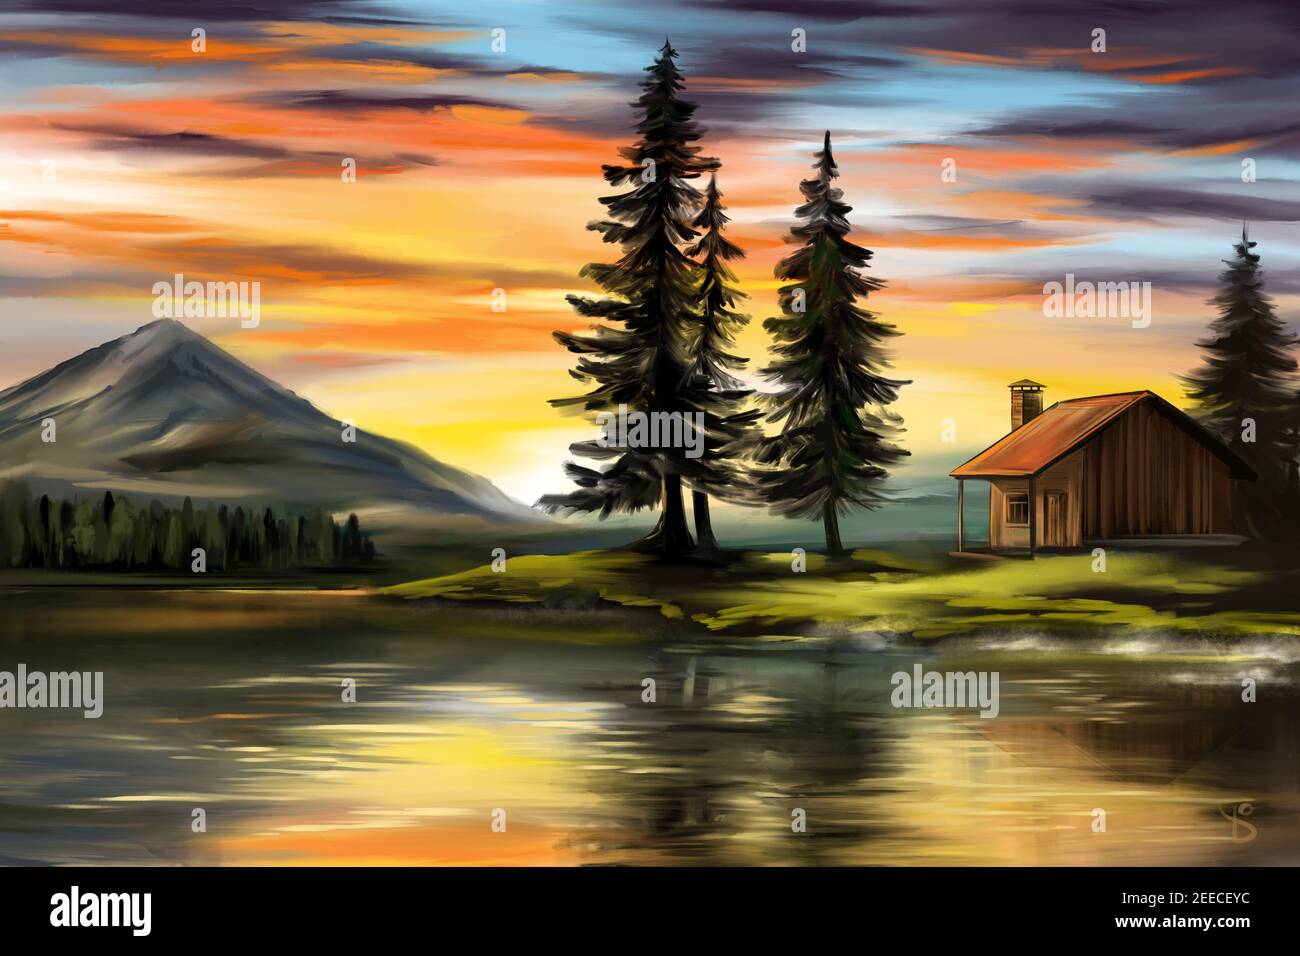 sunrise over the lake, summer landscape, house in the forest, digital art illustration painted with watercolors Stock Photo